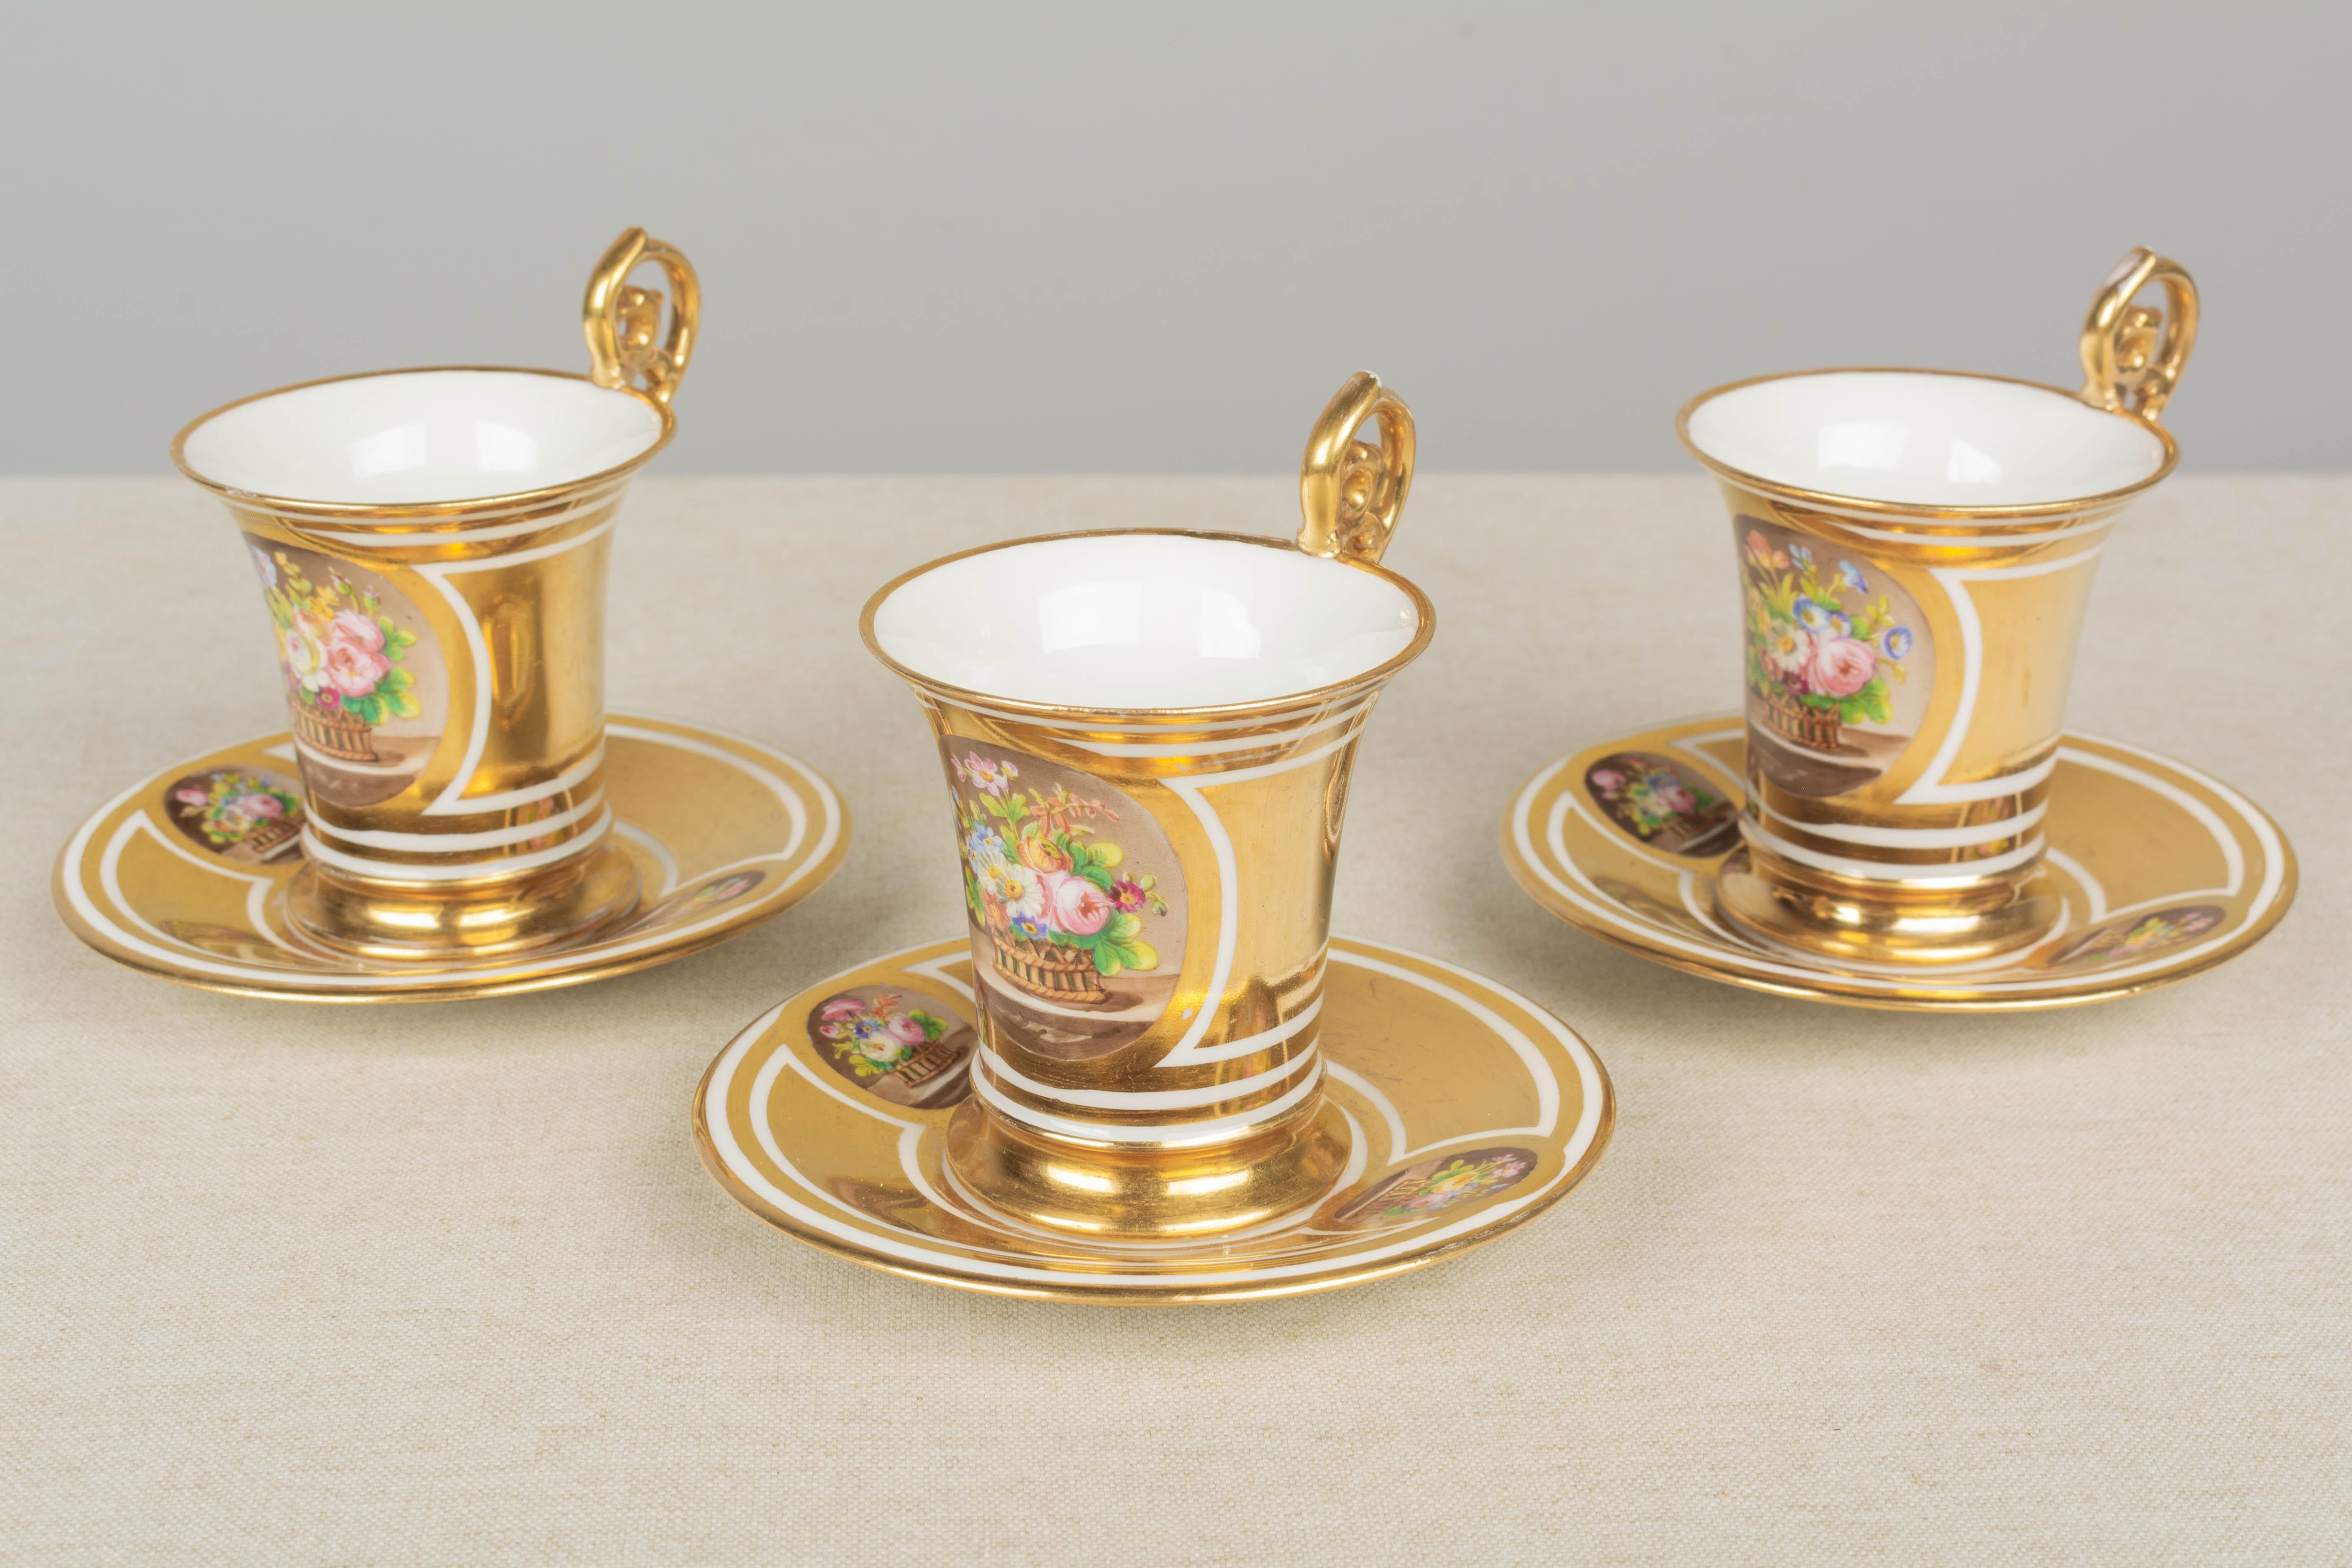 A set of three 19th Century French Sèvres fine gilded porcelain cups and saucers with tall scrolled handles. Hand-painted floral decoration. Sèvres mark to underside with red Château des Tuileries stamp. In good condition with light rubbing to gilt.